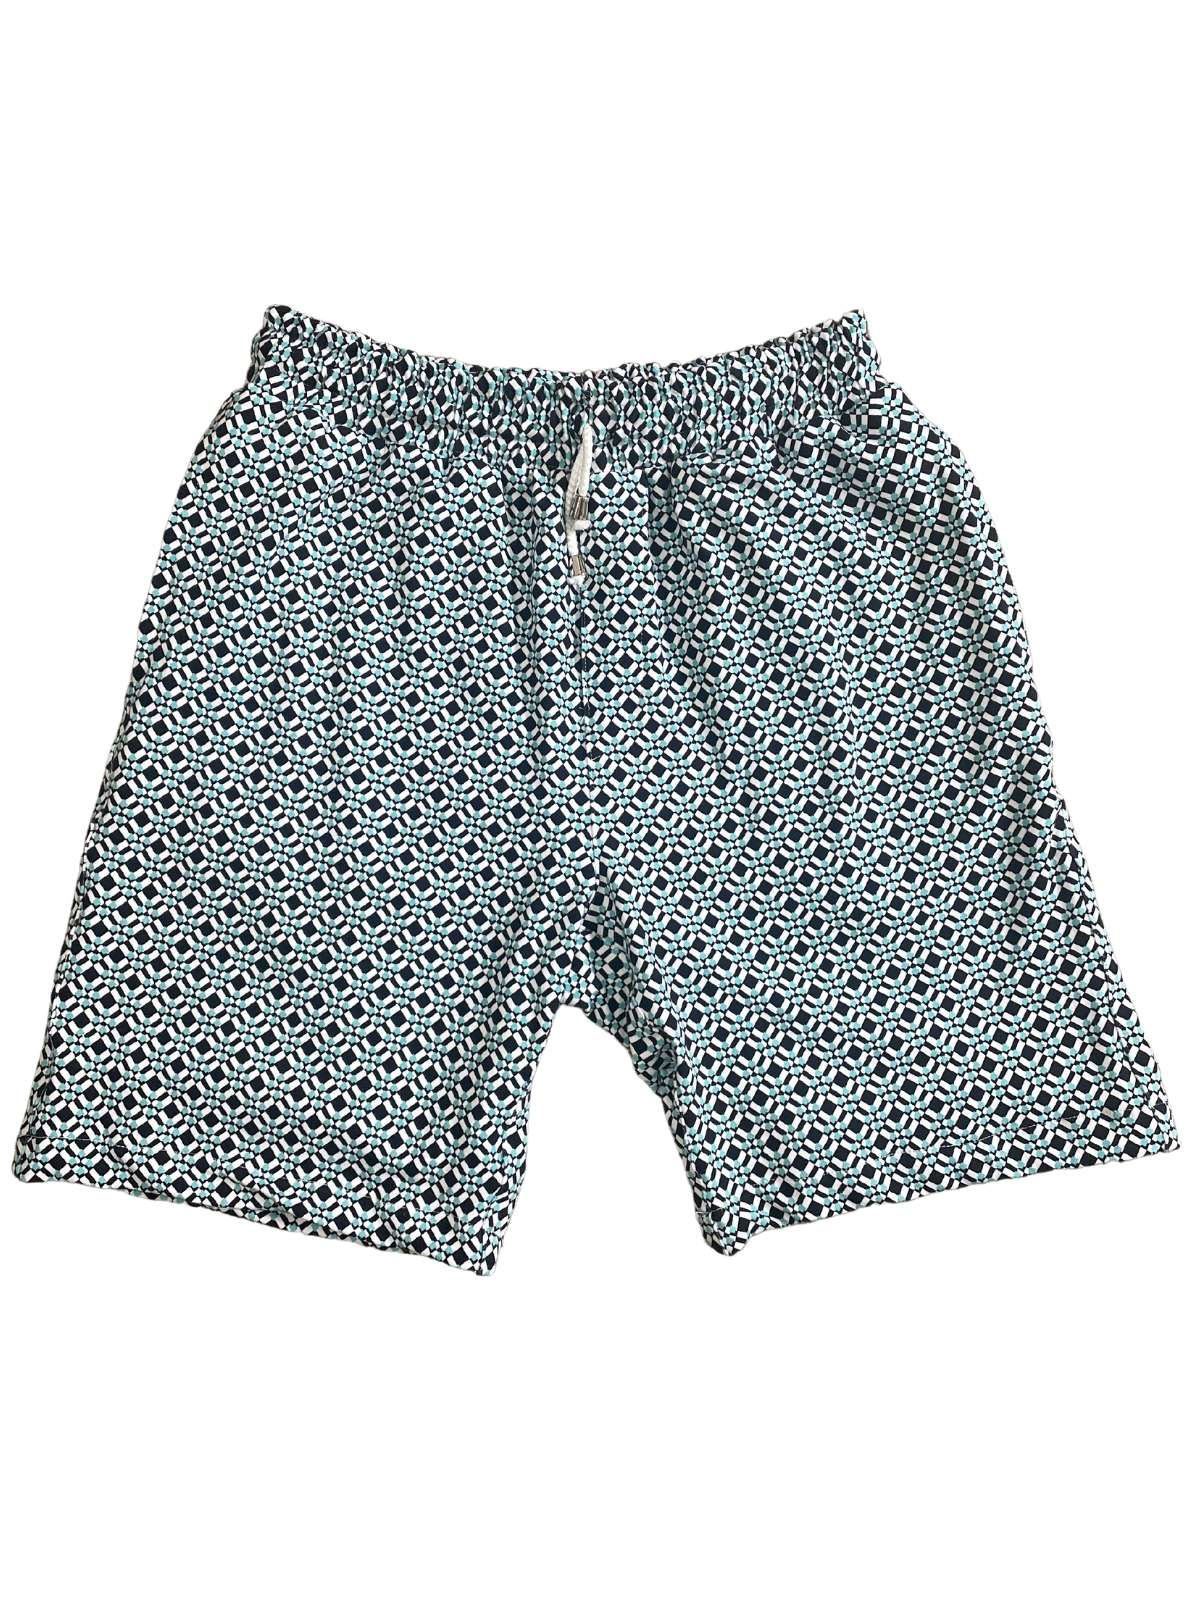 Trouble Geometric Knitted Short - Black/Turquoise